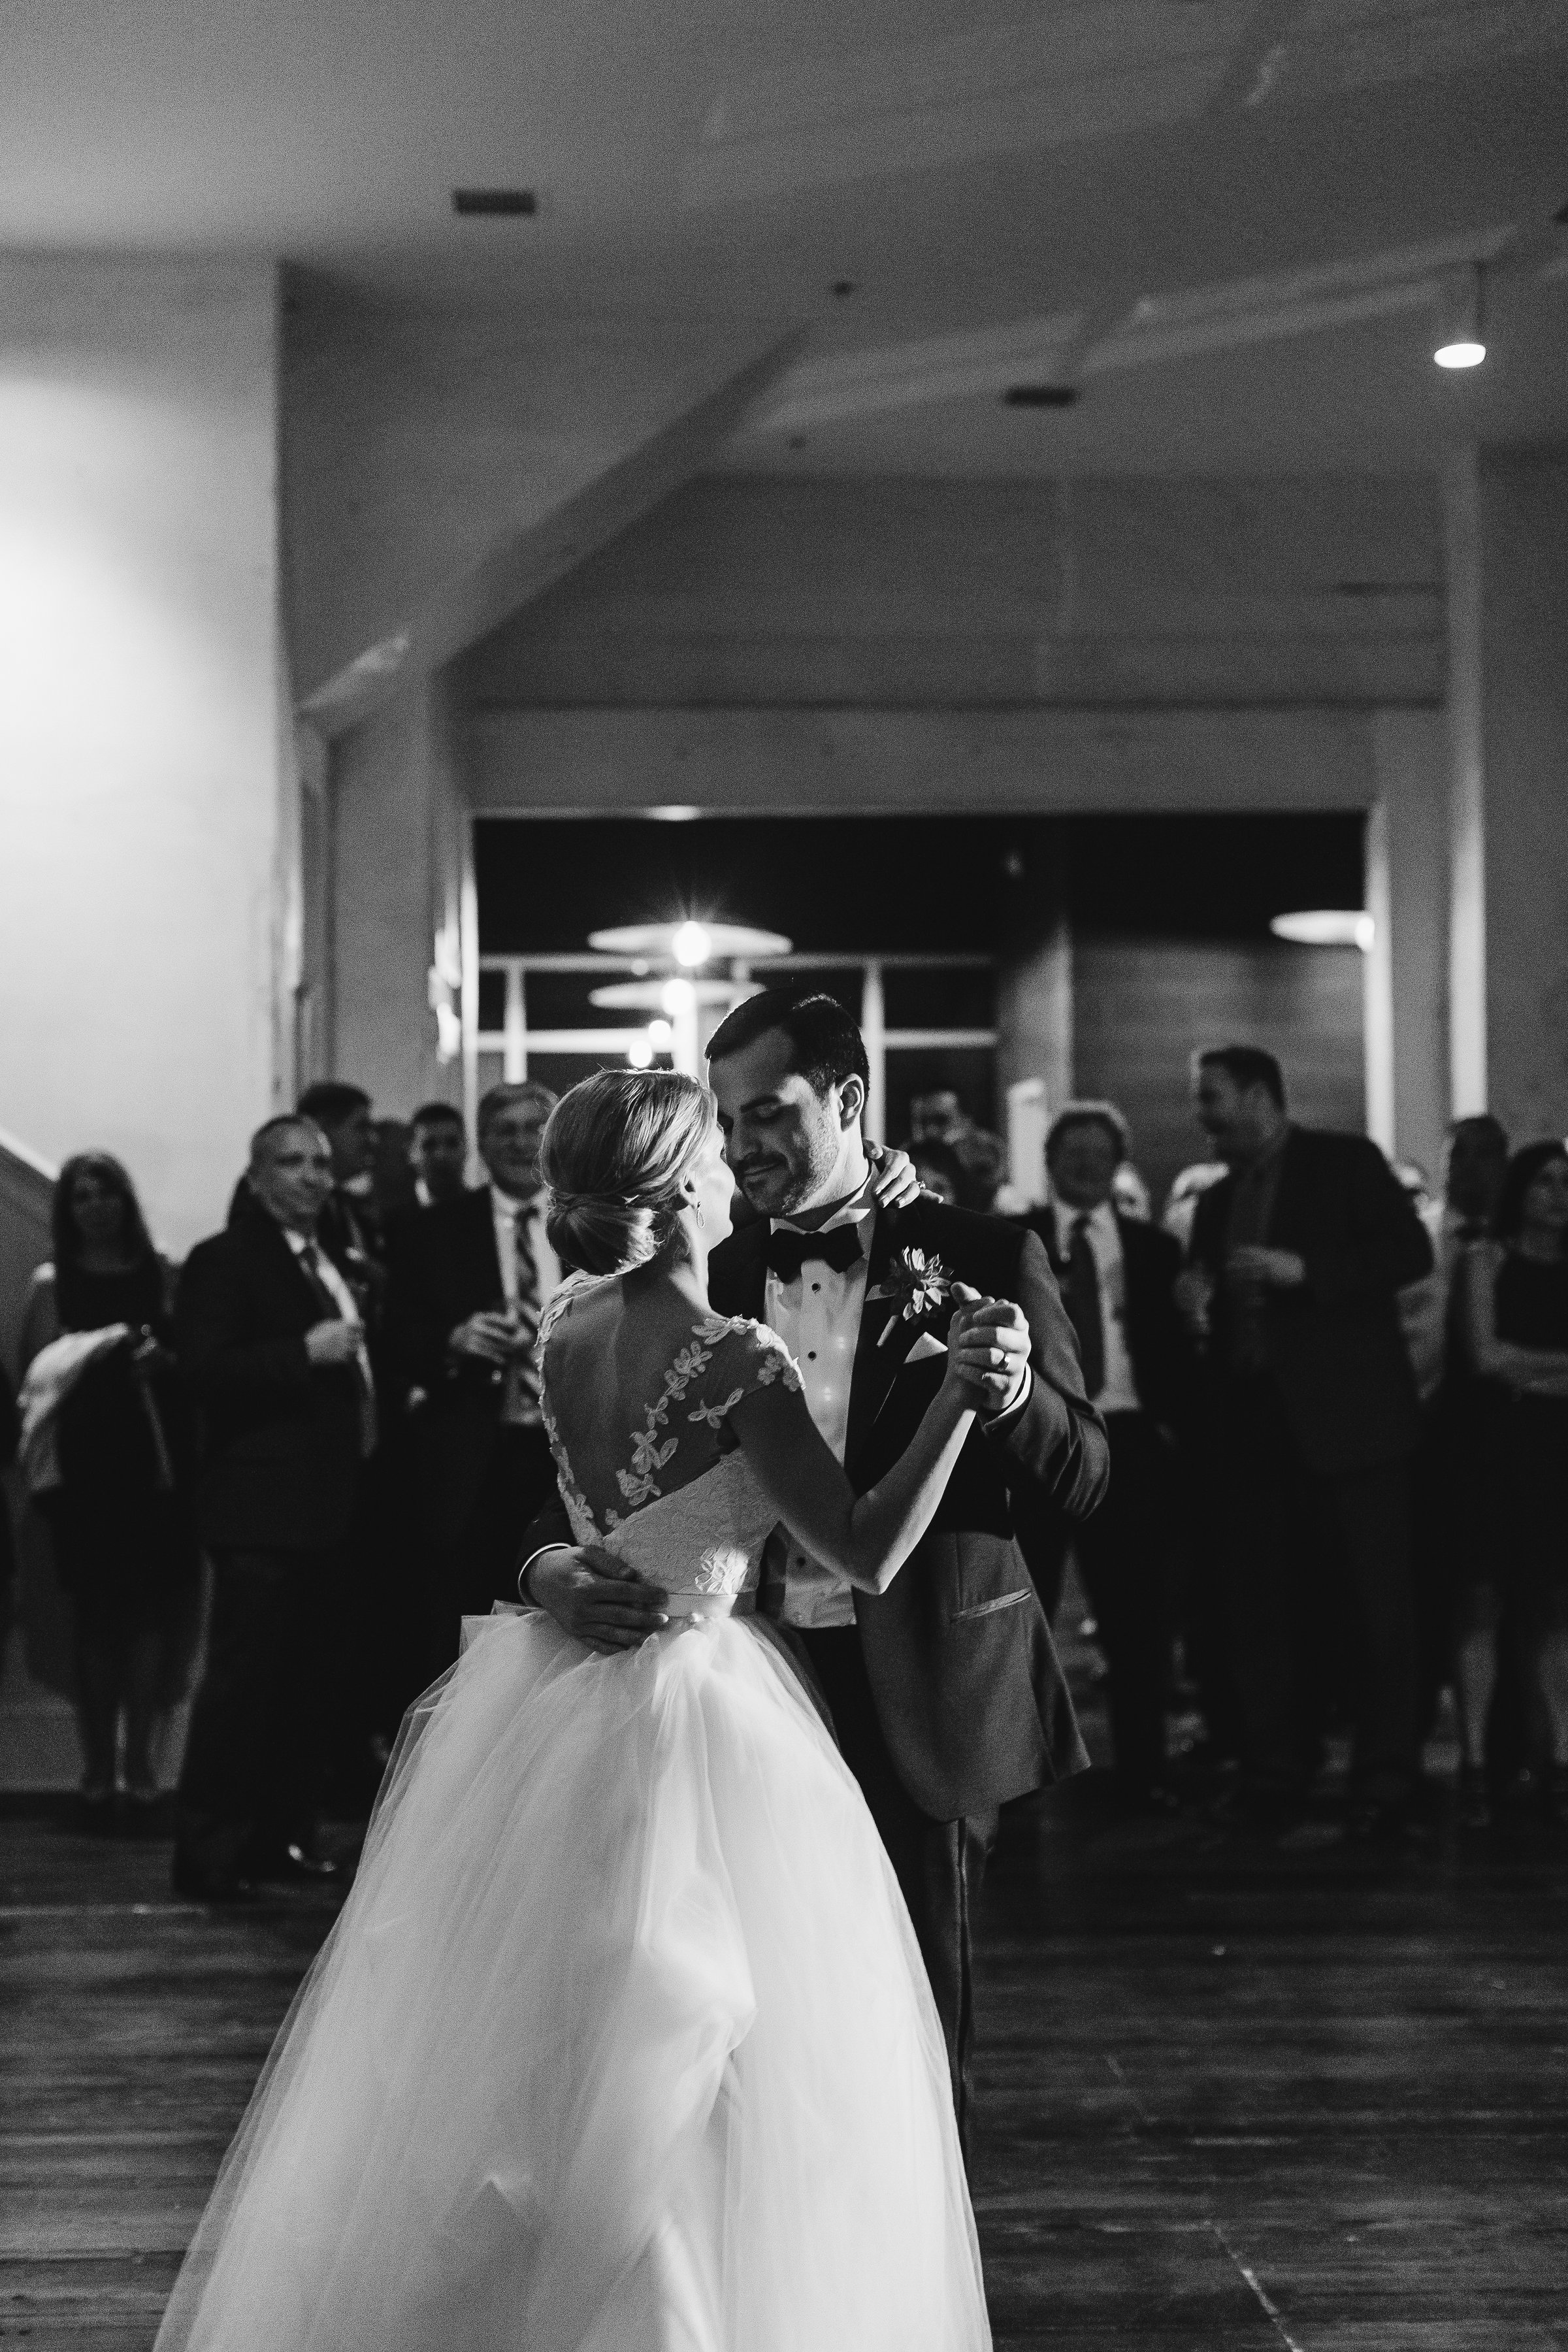 Dance floor with bride and groom black and white